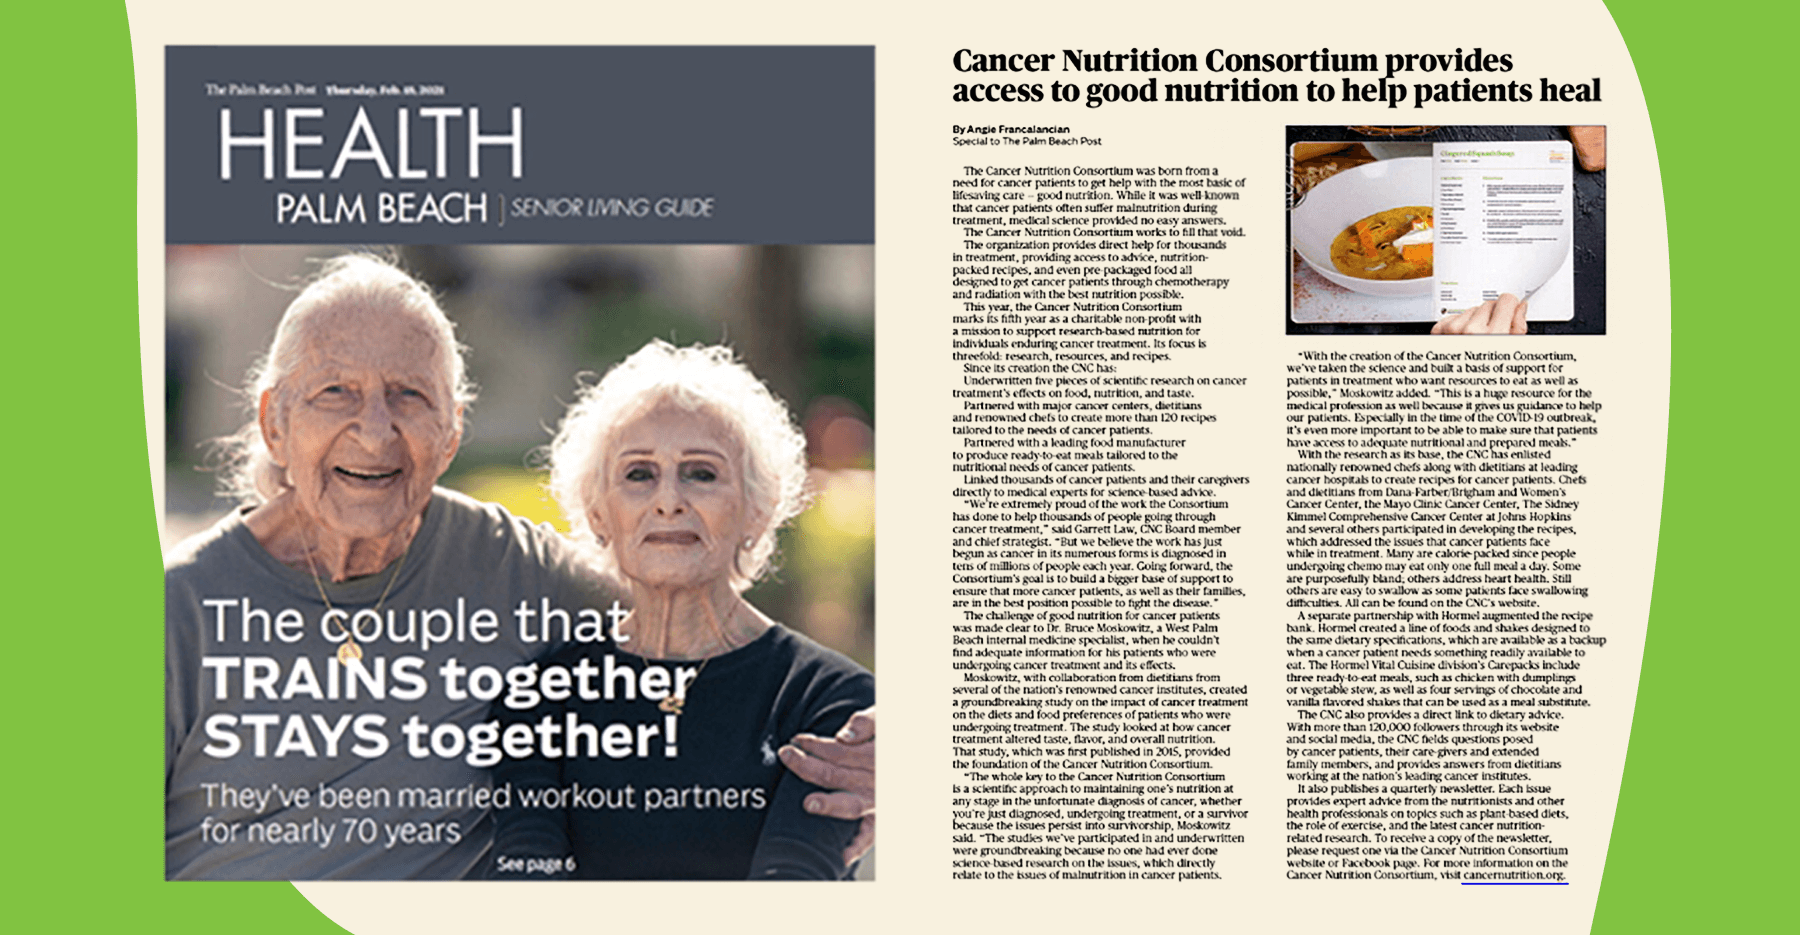 A clipping from the Palm Beach Post about the new Cancer Nutrition Consortium Cookbook